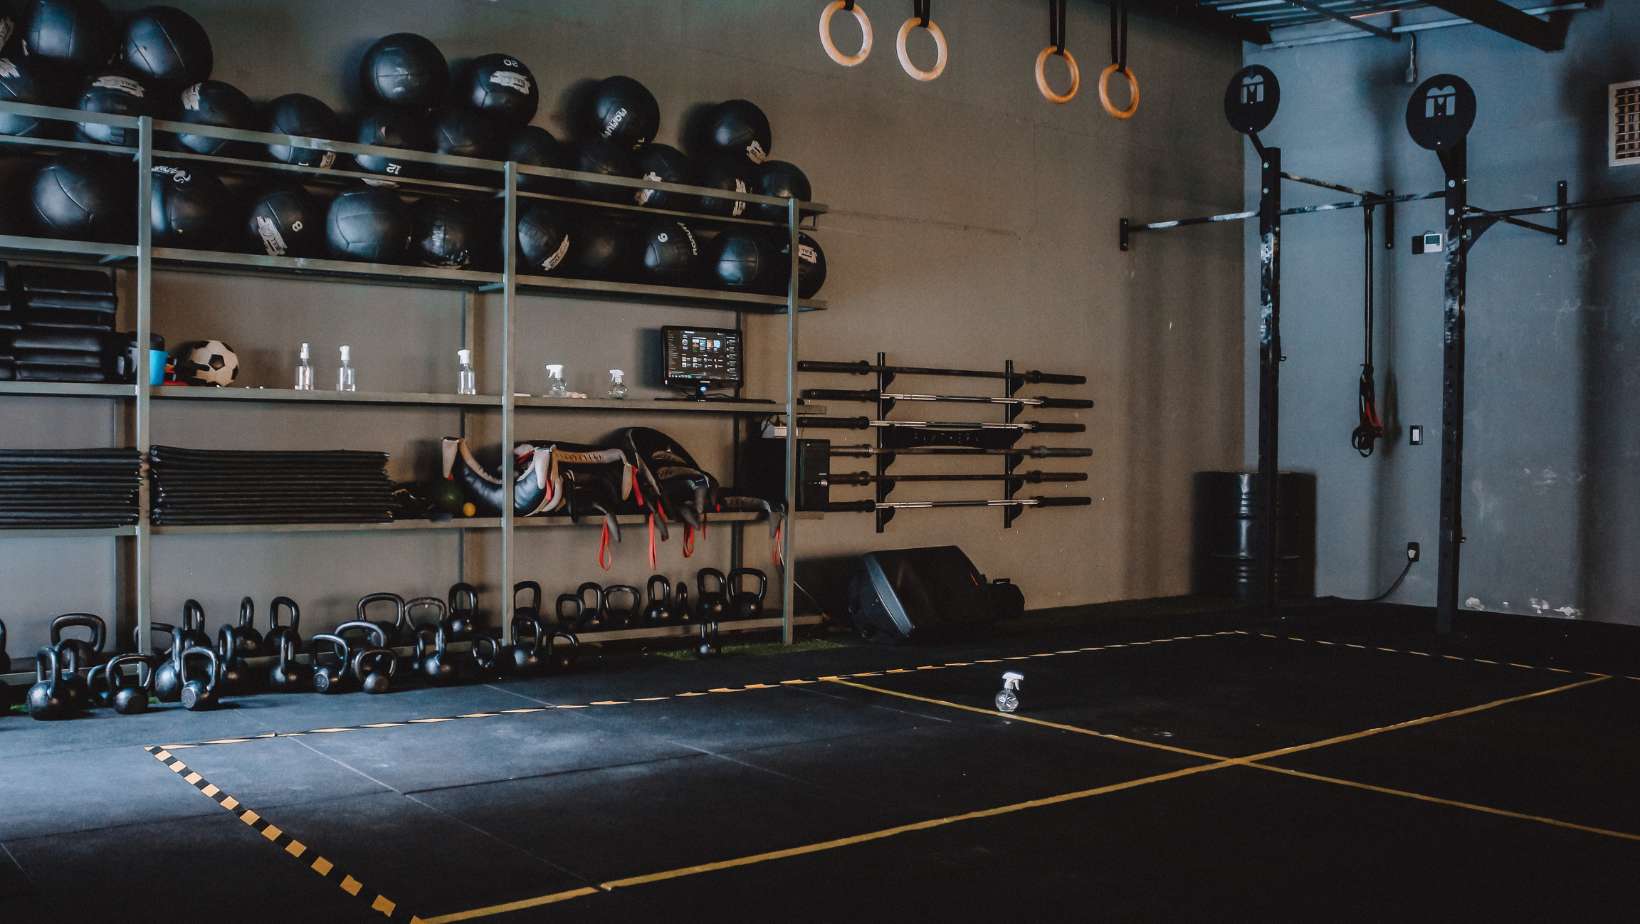 A CrossFit Box with Equipment on a Steel Shelves Near a Gymnastic Rings